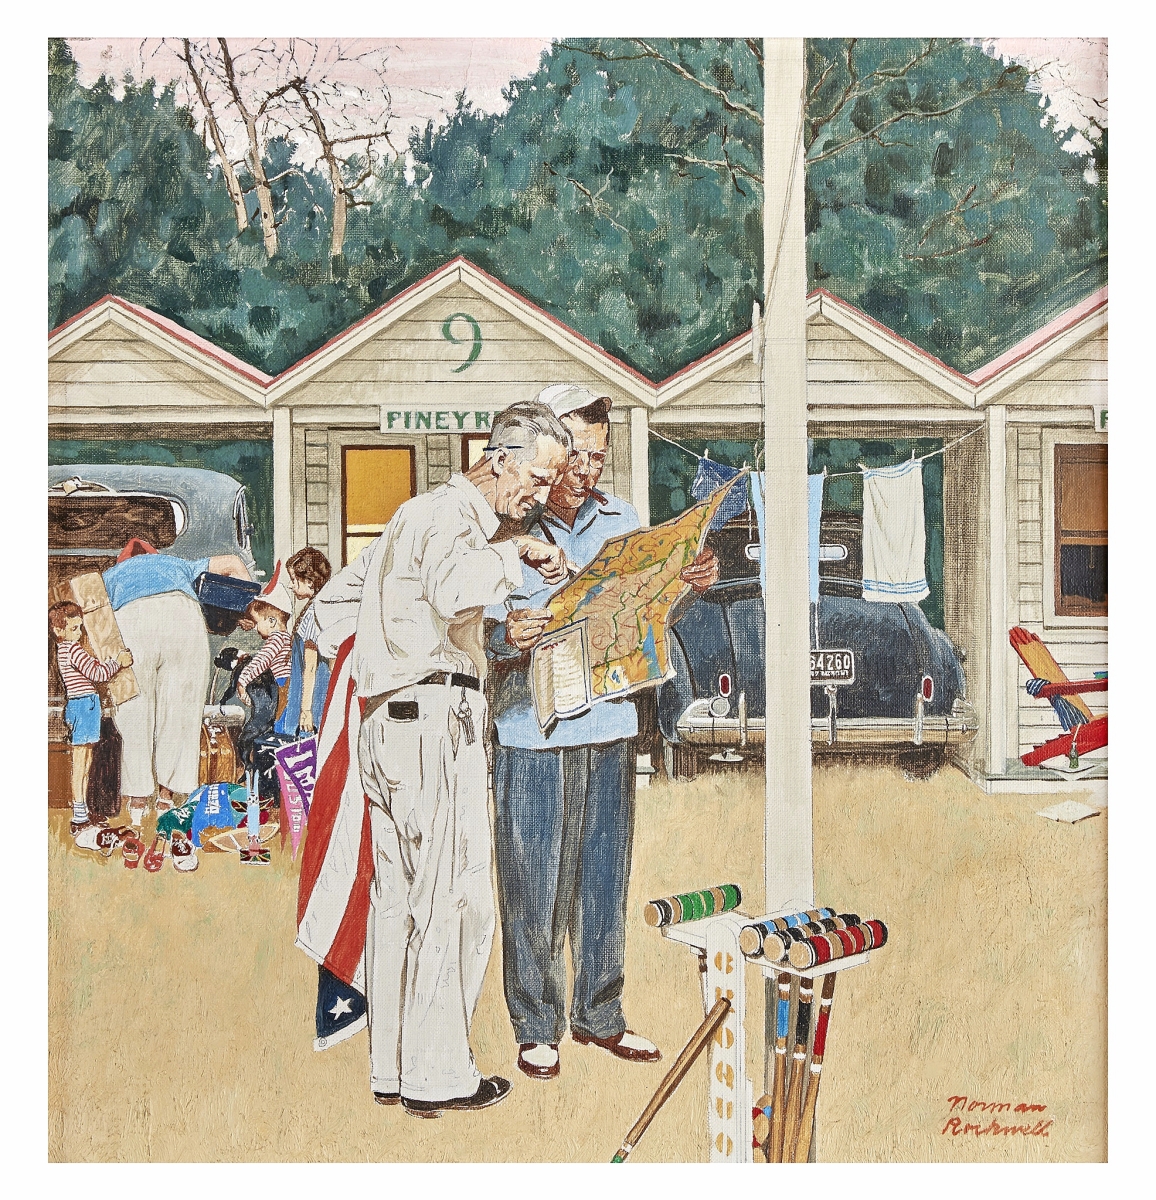 The sale’s leader at $478,000 was a fresh-to-the-market work by Norman Rockwell. “Piney Rest Motel (Cozy Rest Motel)” was originally featured on a promotional poster for the Famous Artists School, a mail correspondence school for aspiring artists that Rockwell taught for. Rockwell had gifted the work to the family through which it descended until now. Oil and pencil on canvas, 18 by 17 inches.